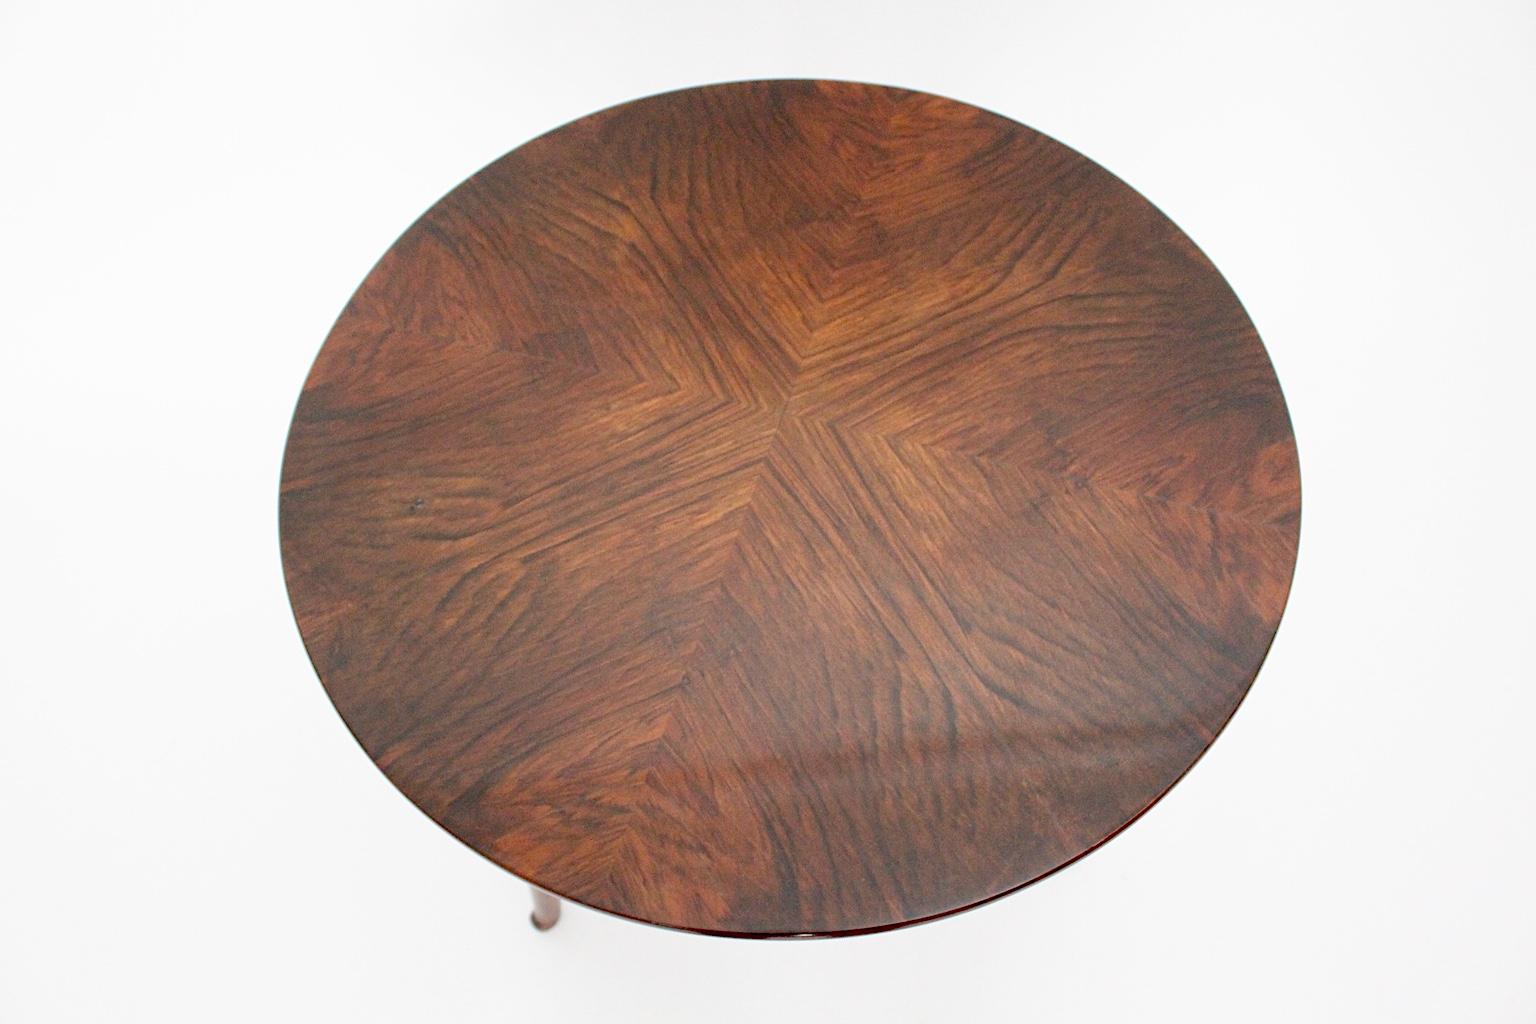 Art Deco vintage walnut side table / coffee table by Josef Frank for Haus & Garten, circa 1925 Vienna, shows a top with beautiful walnut burl veneer. This  trilegged side table from spruce and beech.
The simple and chic walnut side table was